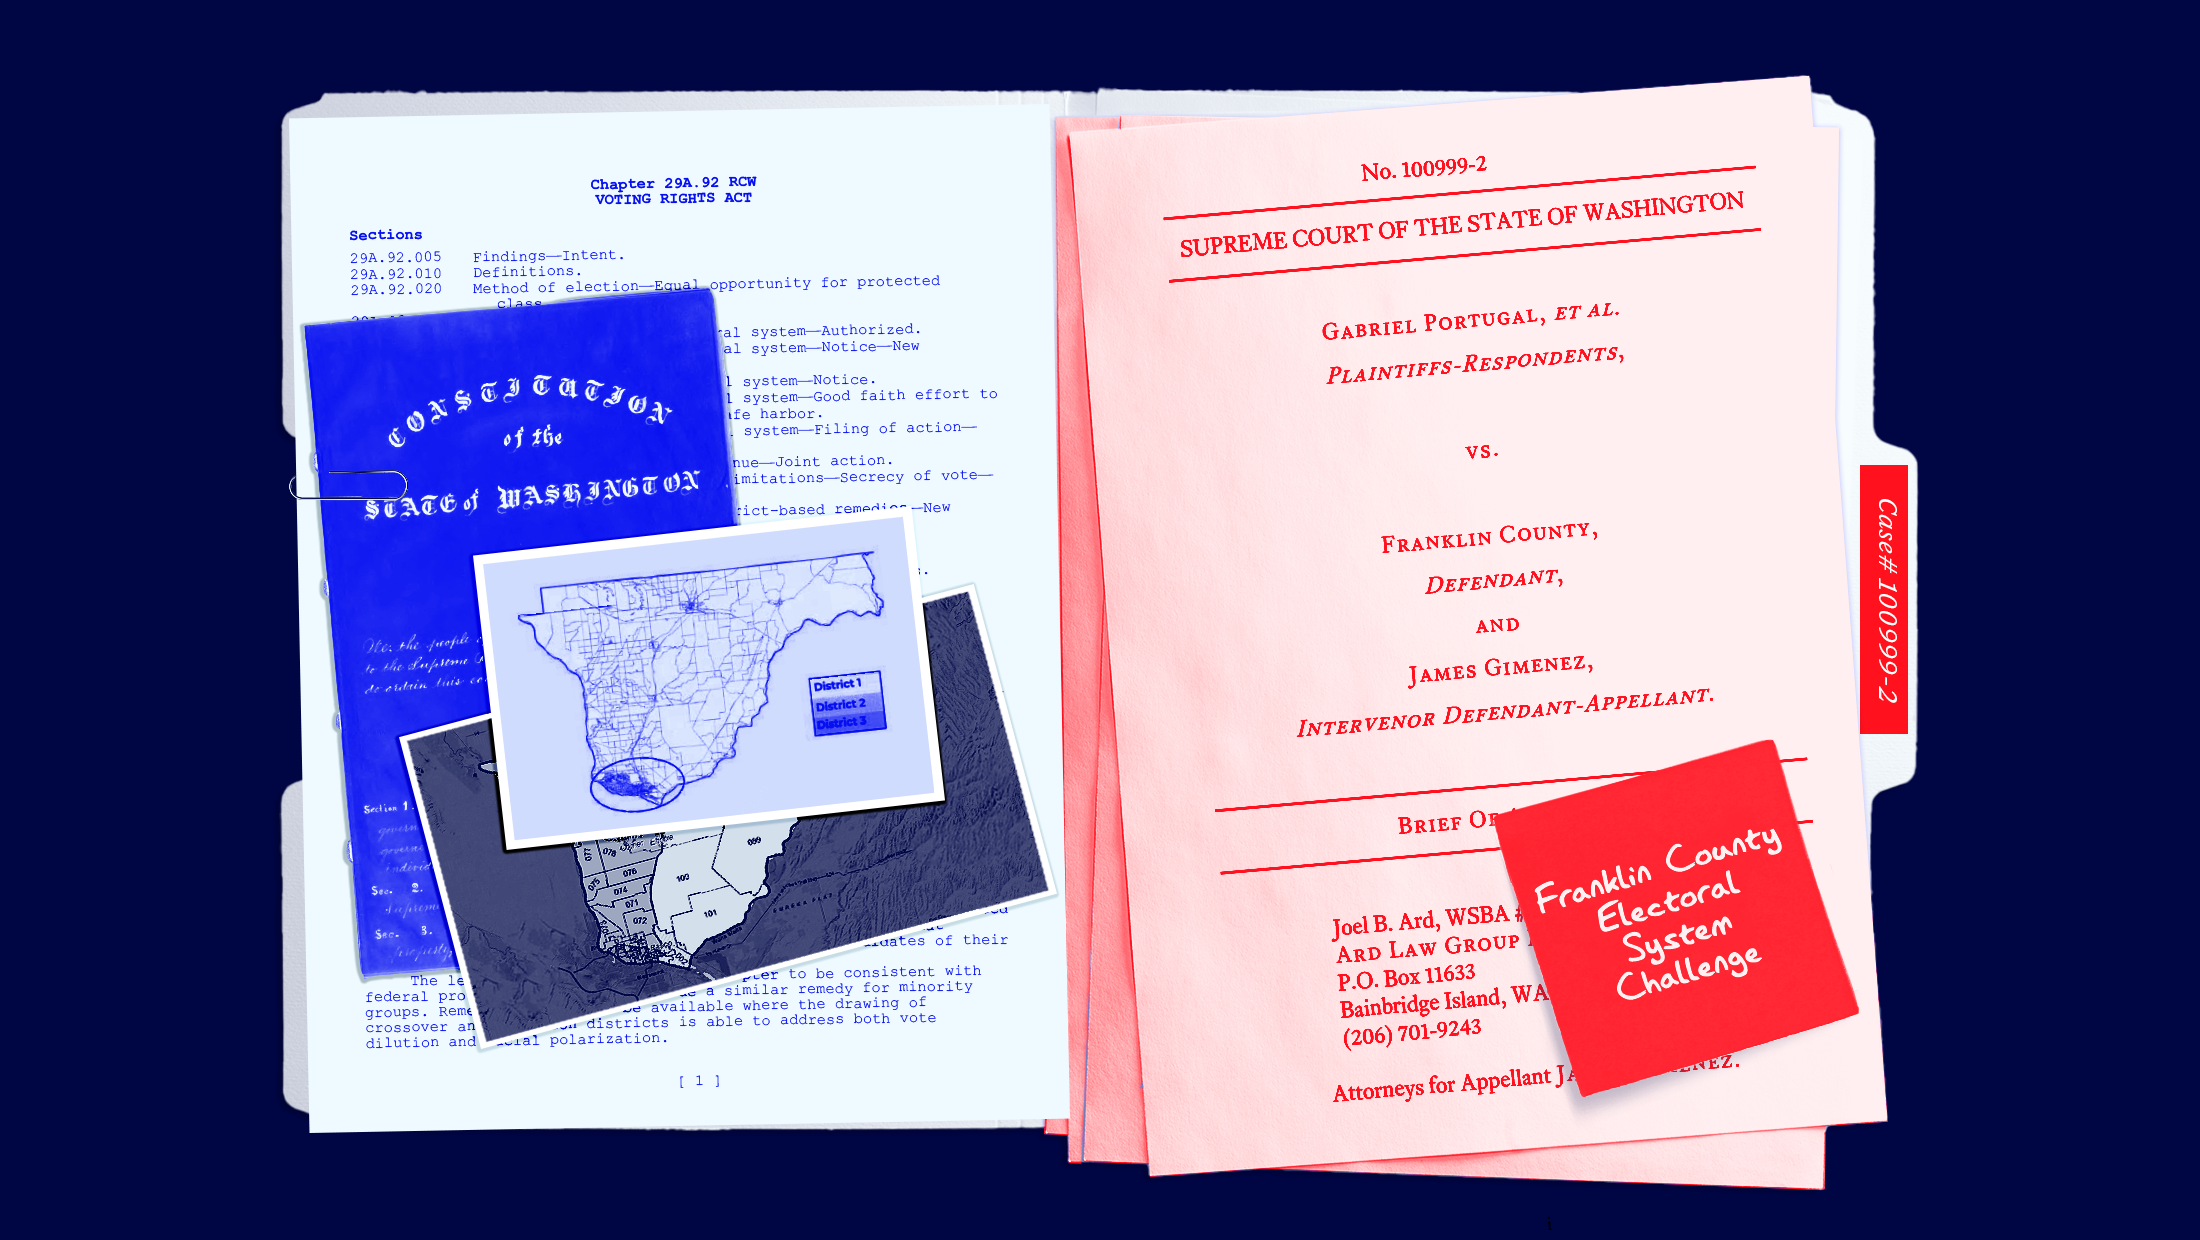 An open-face manilla file folder that is blue toned on the left side and red toned on the right side. On the blue side, there is a copy of Washington State's Voting Rights Act, a map of Franklin County, Washington's electoral districts for the Franklin County Commission and a copy of the Washington Constitution. On the right side, there is a court filing in the case Portugal v. Franklin County. On the filing, there is a sticky note that reads “Franklin County Electoral System Challenge.” Finally on the tab on the right-hand side of the manilla file folder, there is the case number, 100999-2.